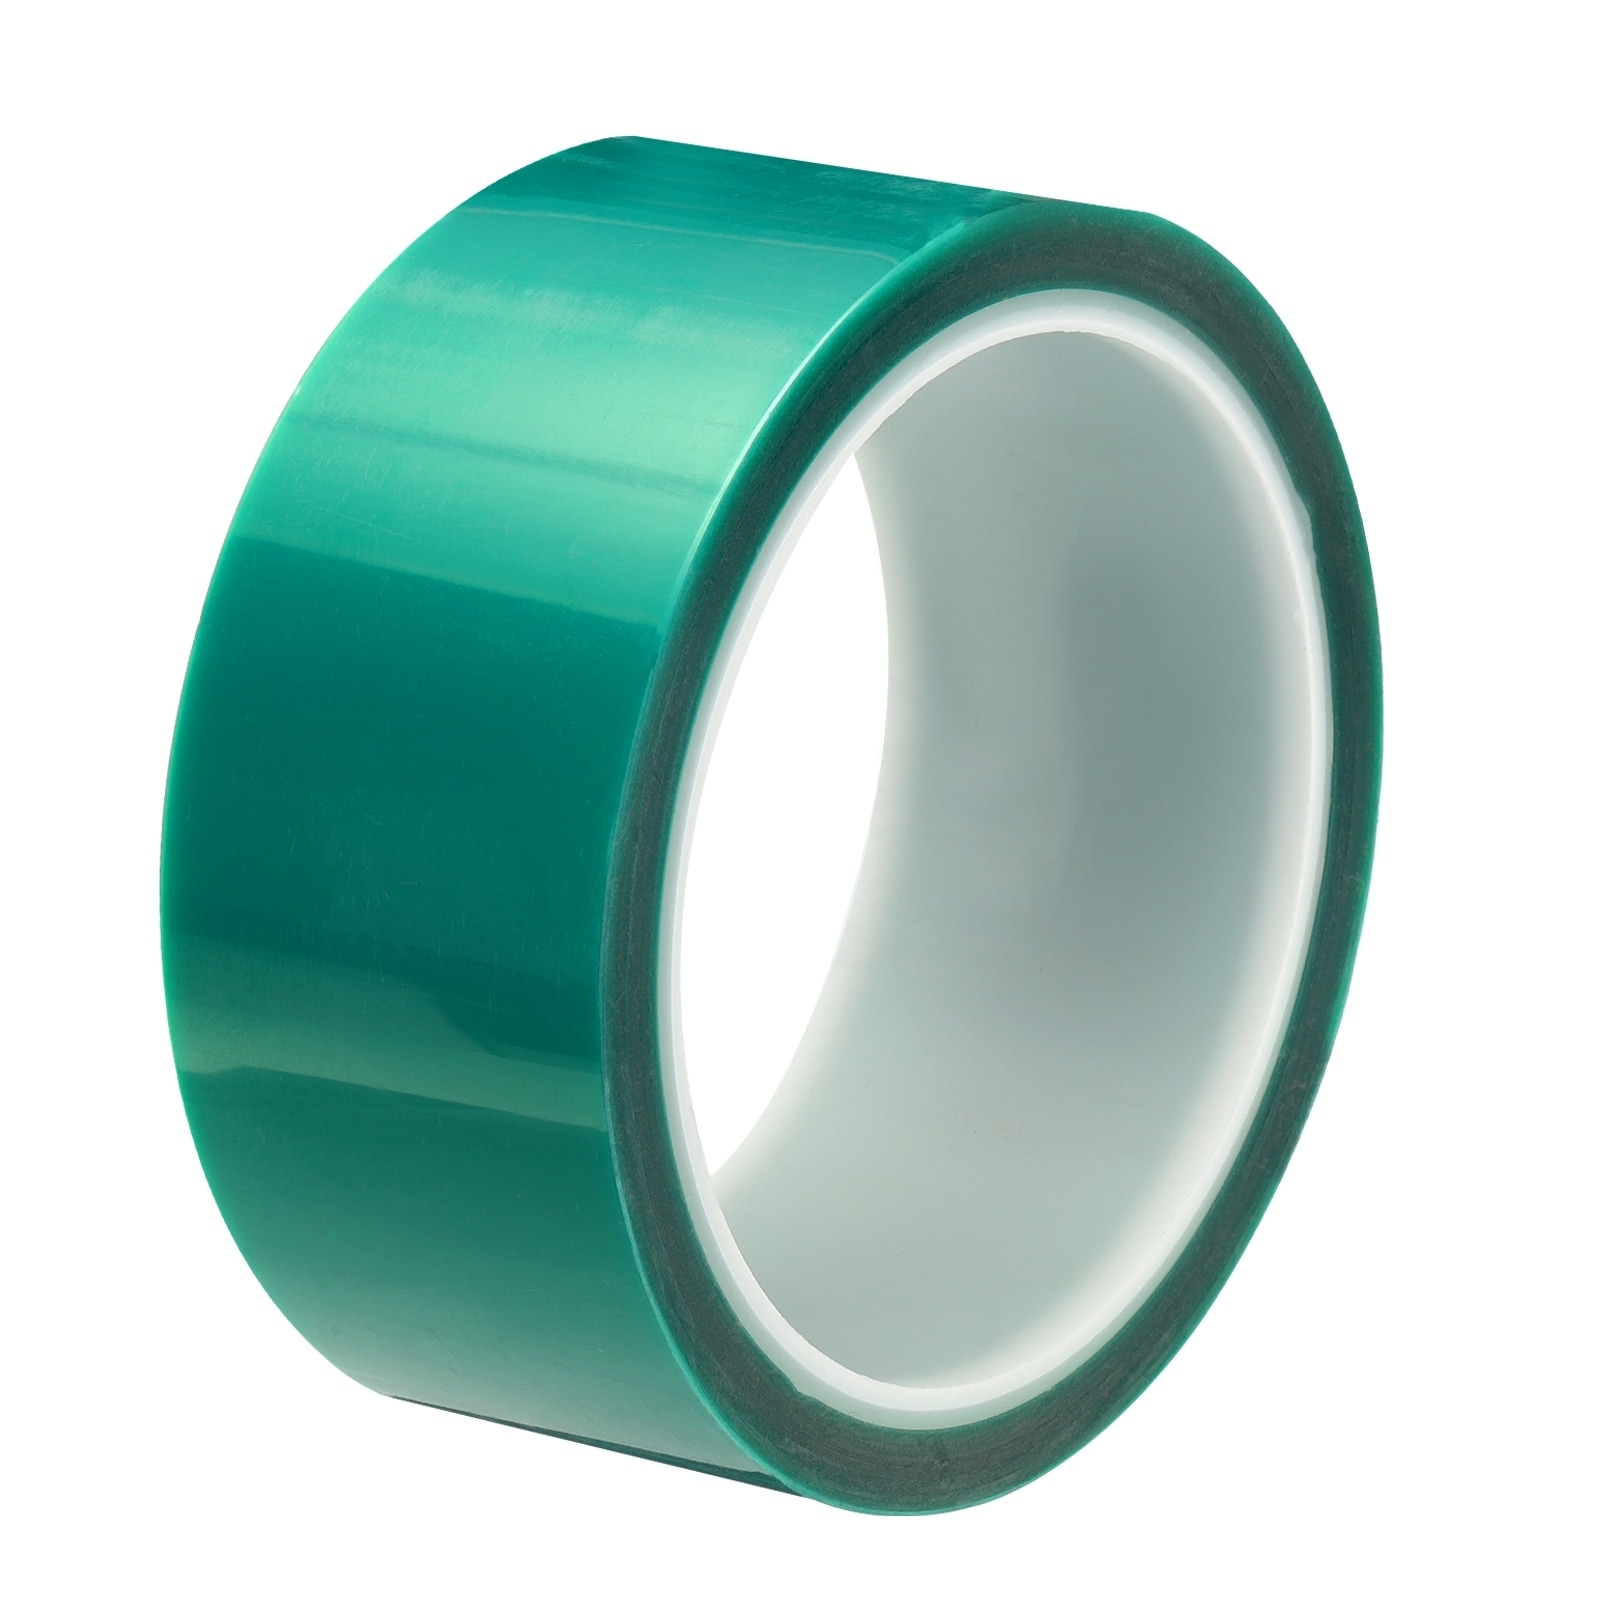 Resin Tape Silicone Adhesive Tape for Epoxy Resin,0.71 Inch Wide 108FT  Long,3PCS - Green - Bed Bath & Beyond - 39178405